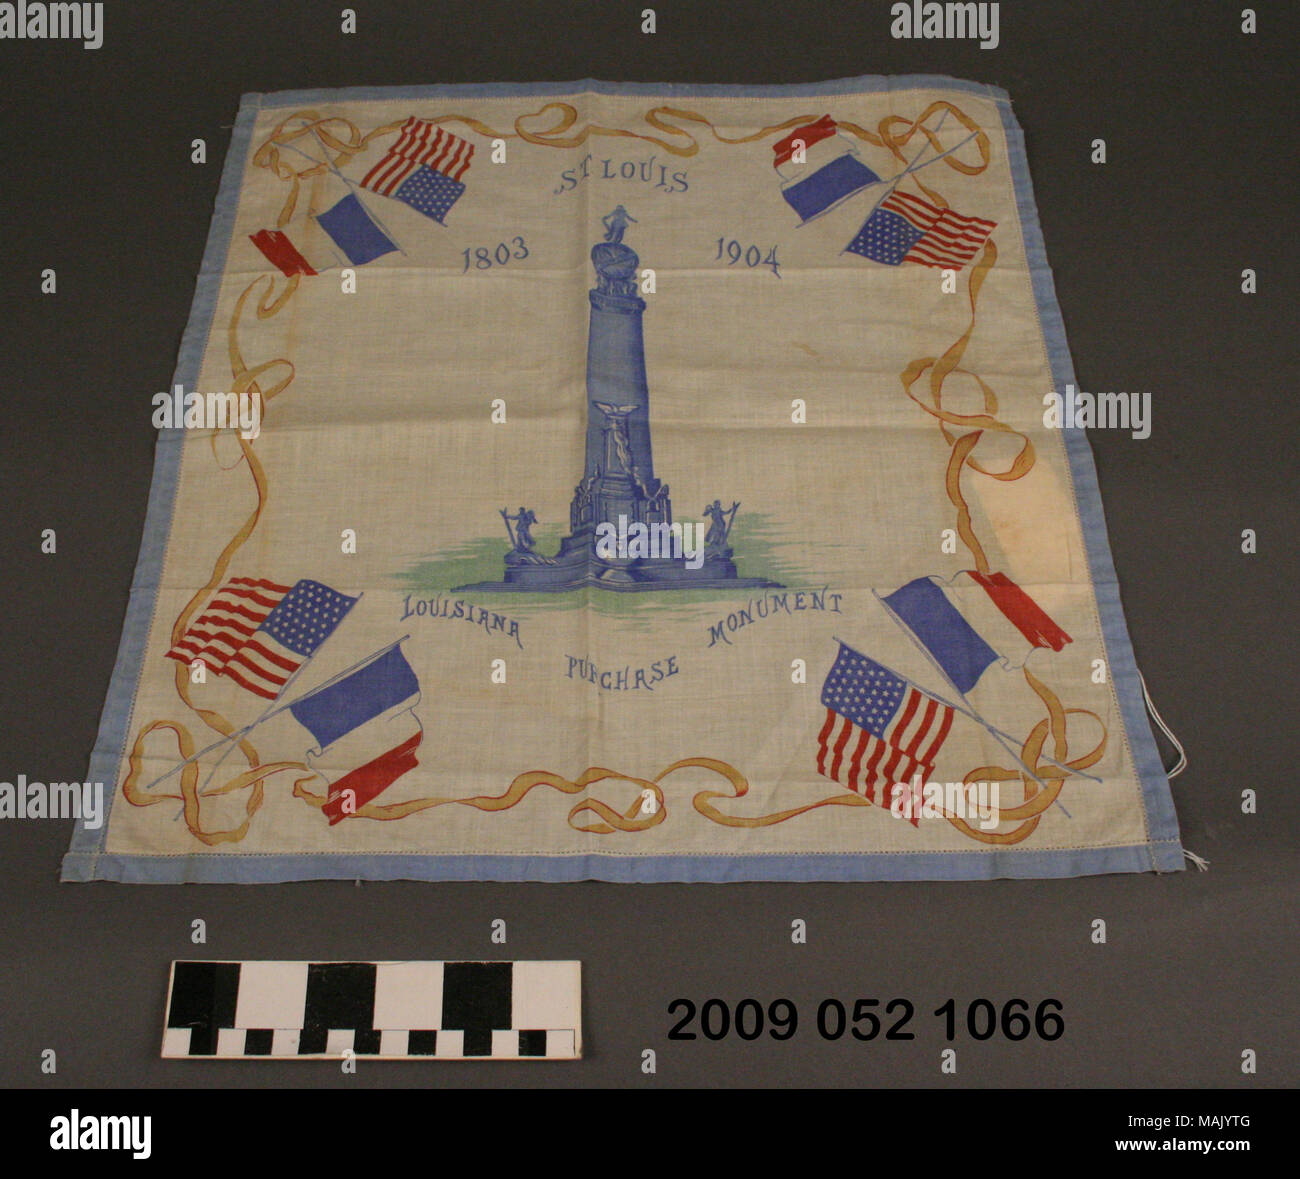 Multi-color cotton scarf has a small, light blue border all around and a large blue rendition of the Louisiana Purchase Monument in the center. It is a souvenir from the 1904 World's Fair. Title: Multi-color Cotton Scarf Featuring the Louisiana Purchase Monument From the 1904 World's Fair  . 1904. Stock Photo